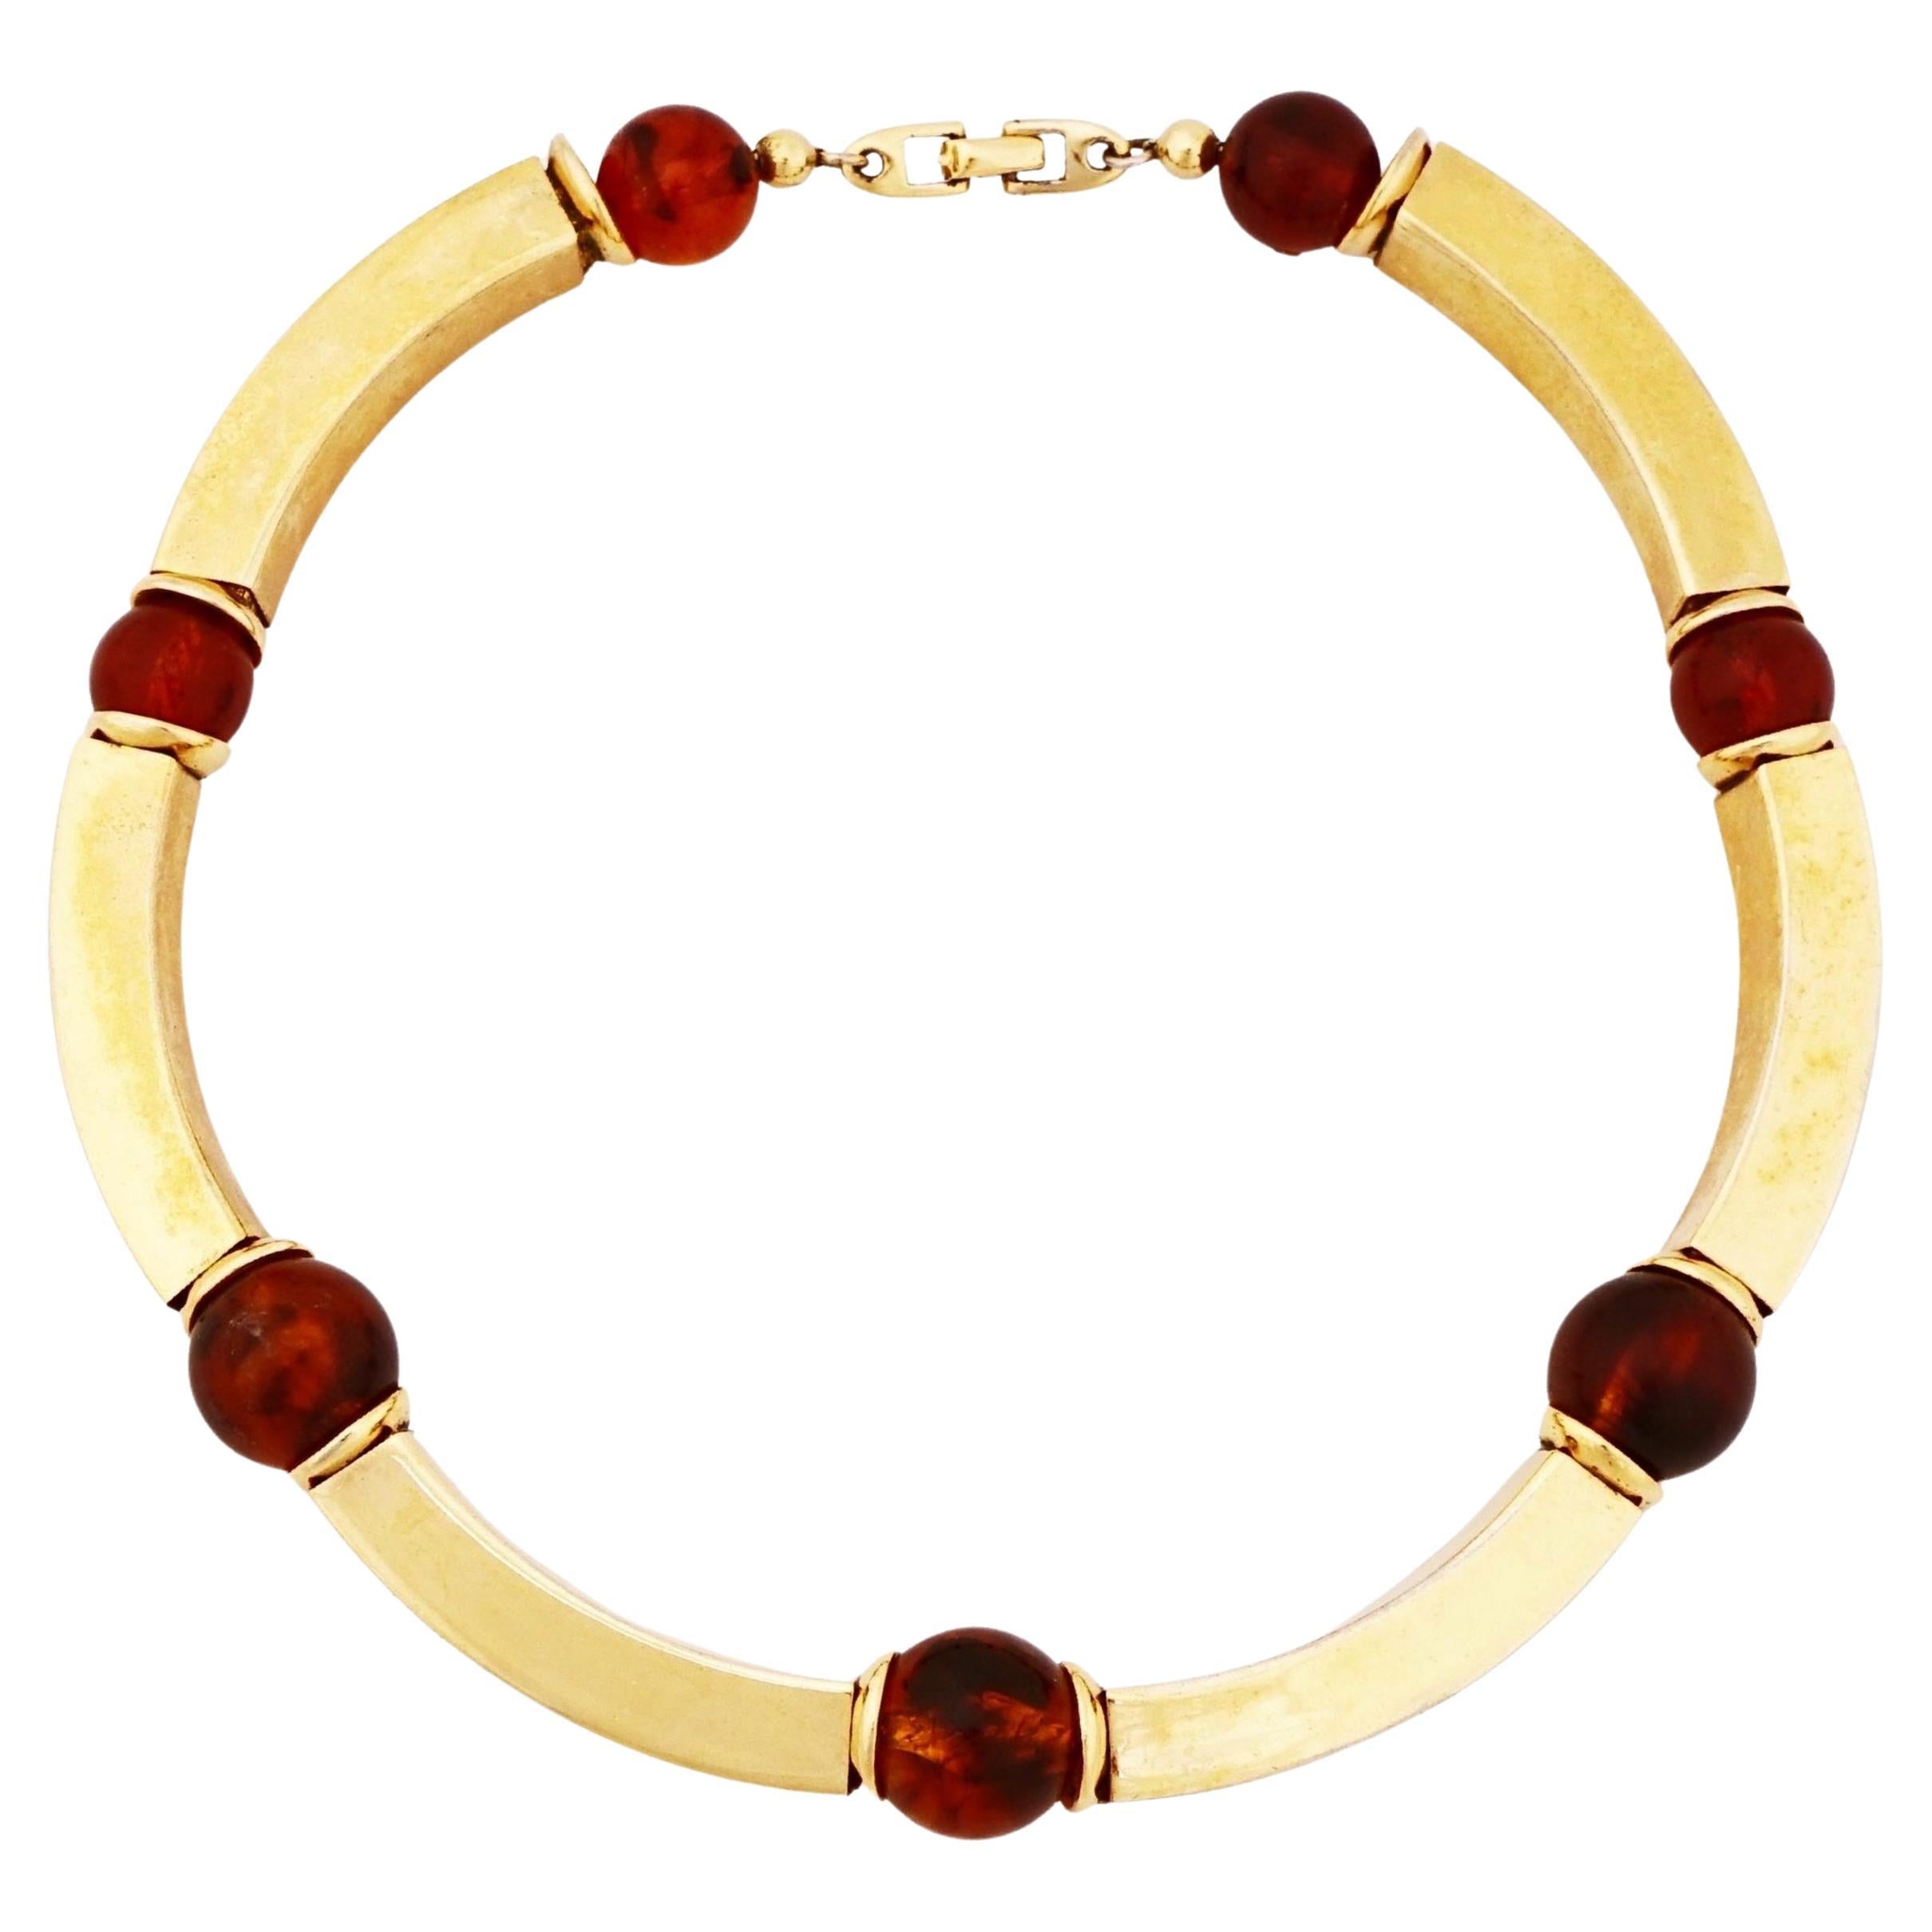 Gold Link Choker Necklace With Lucite Tortoise Beads By Napier, 1970s For Sale